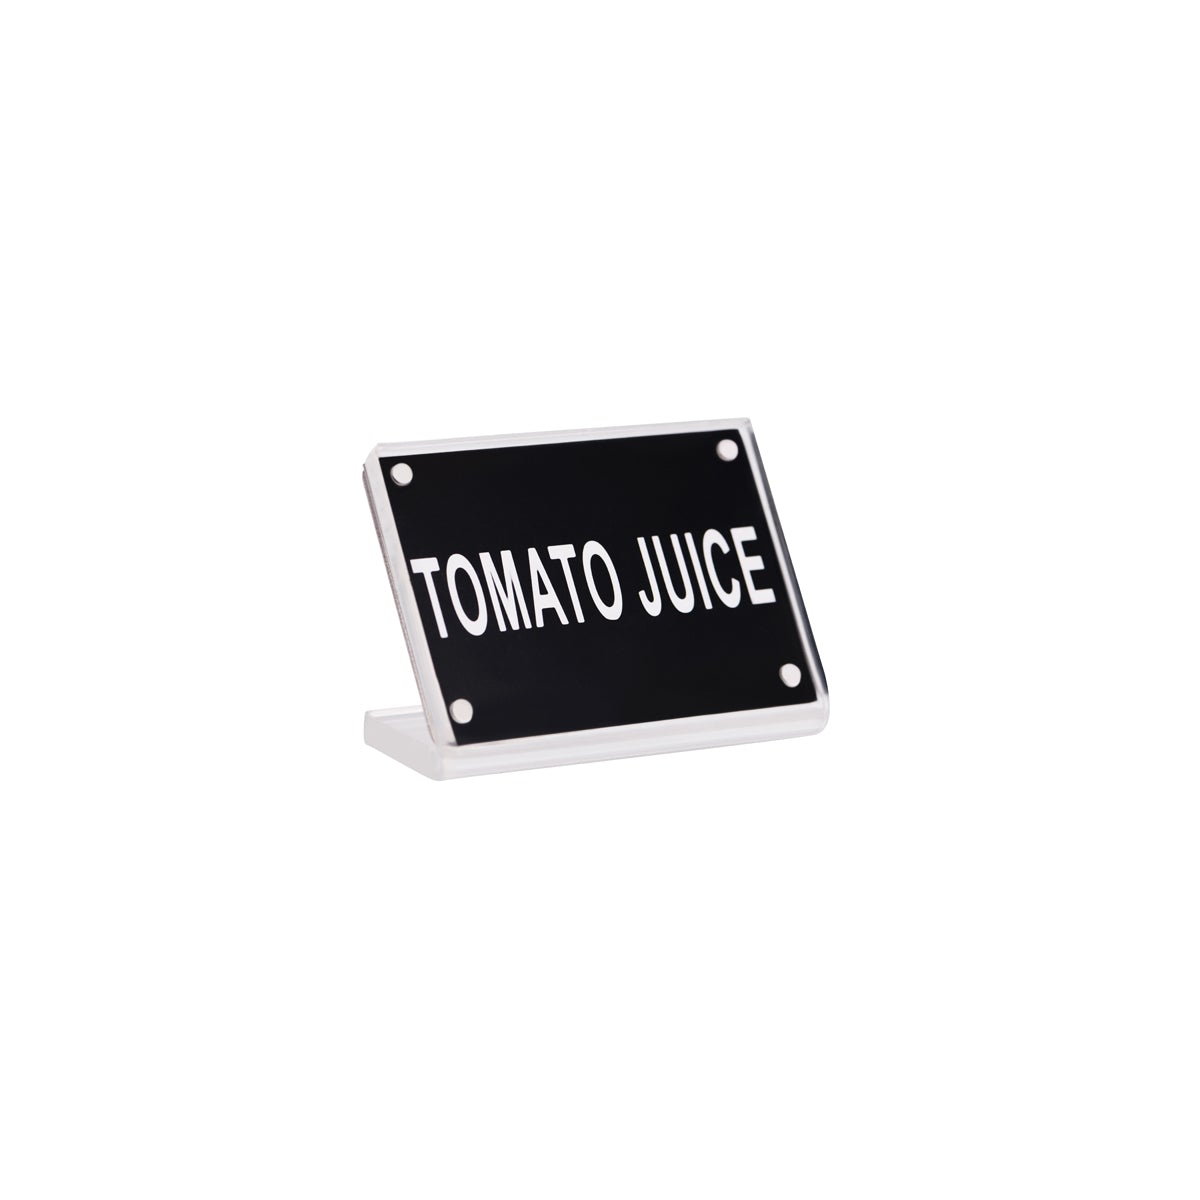 81325 Chef Inox Buffet Sign Acrylic with Magnet Plate - Tomato Juice Tomkin Australia Hospitality Supplies